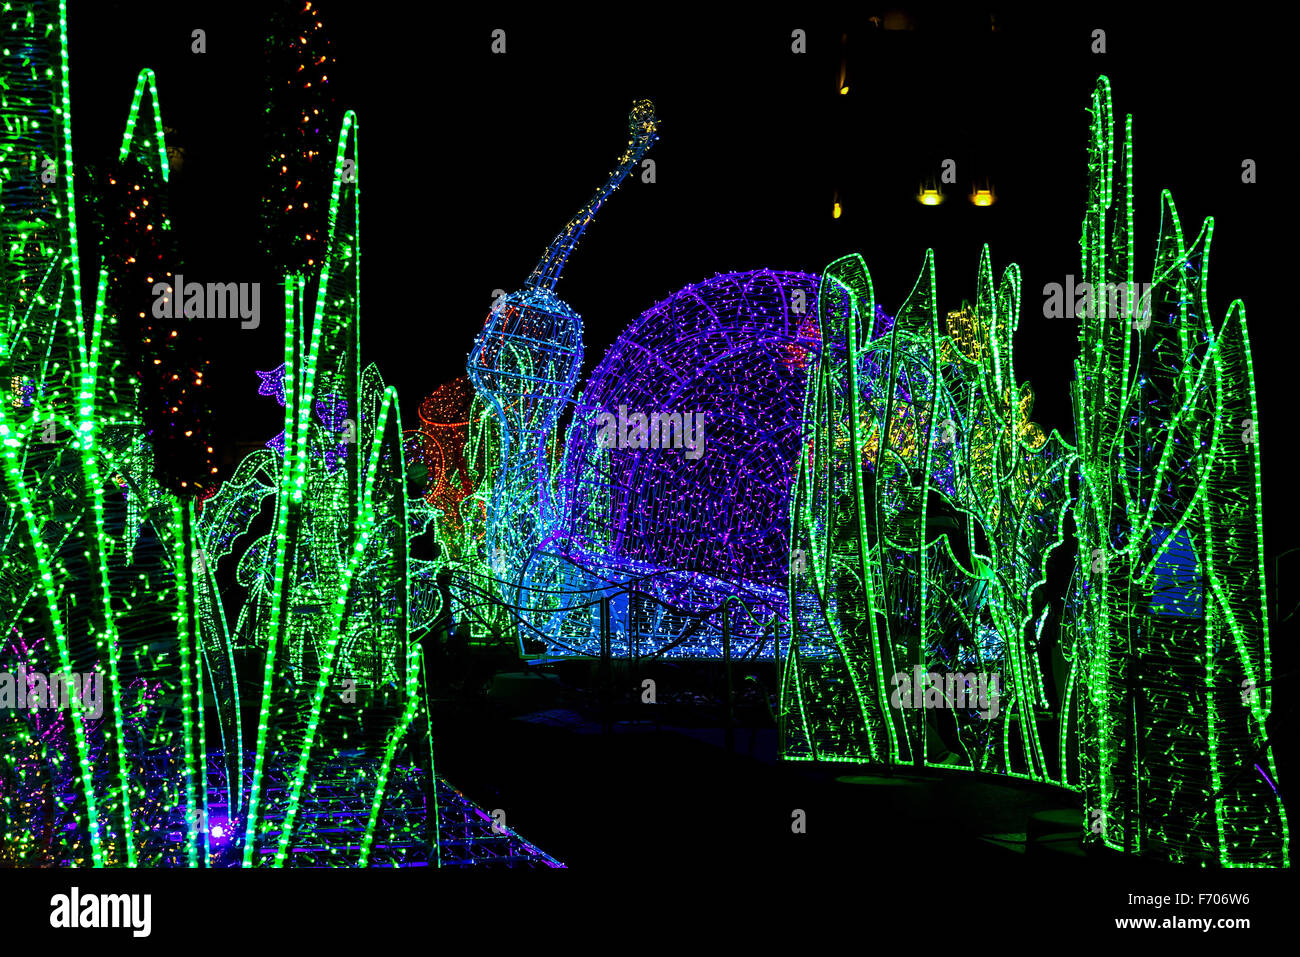 Construction of Snail and Grass made by Christmas Colorful Garland at Night Stock Photo